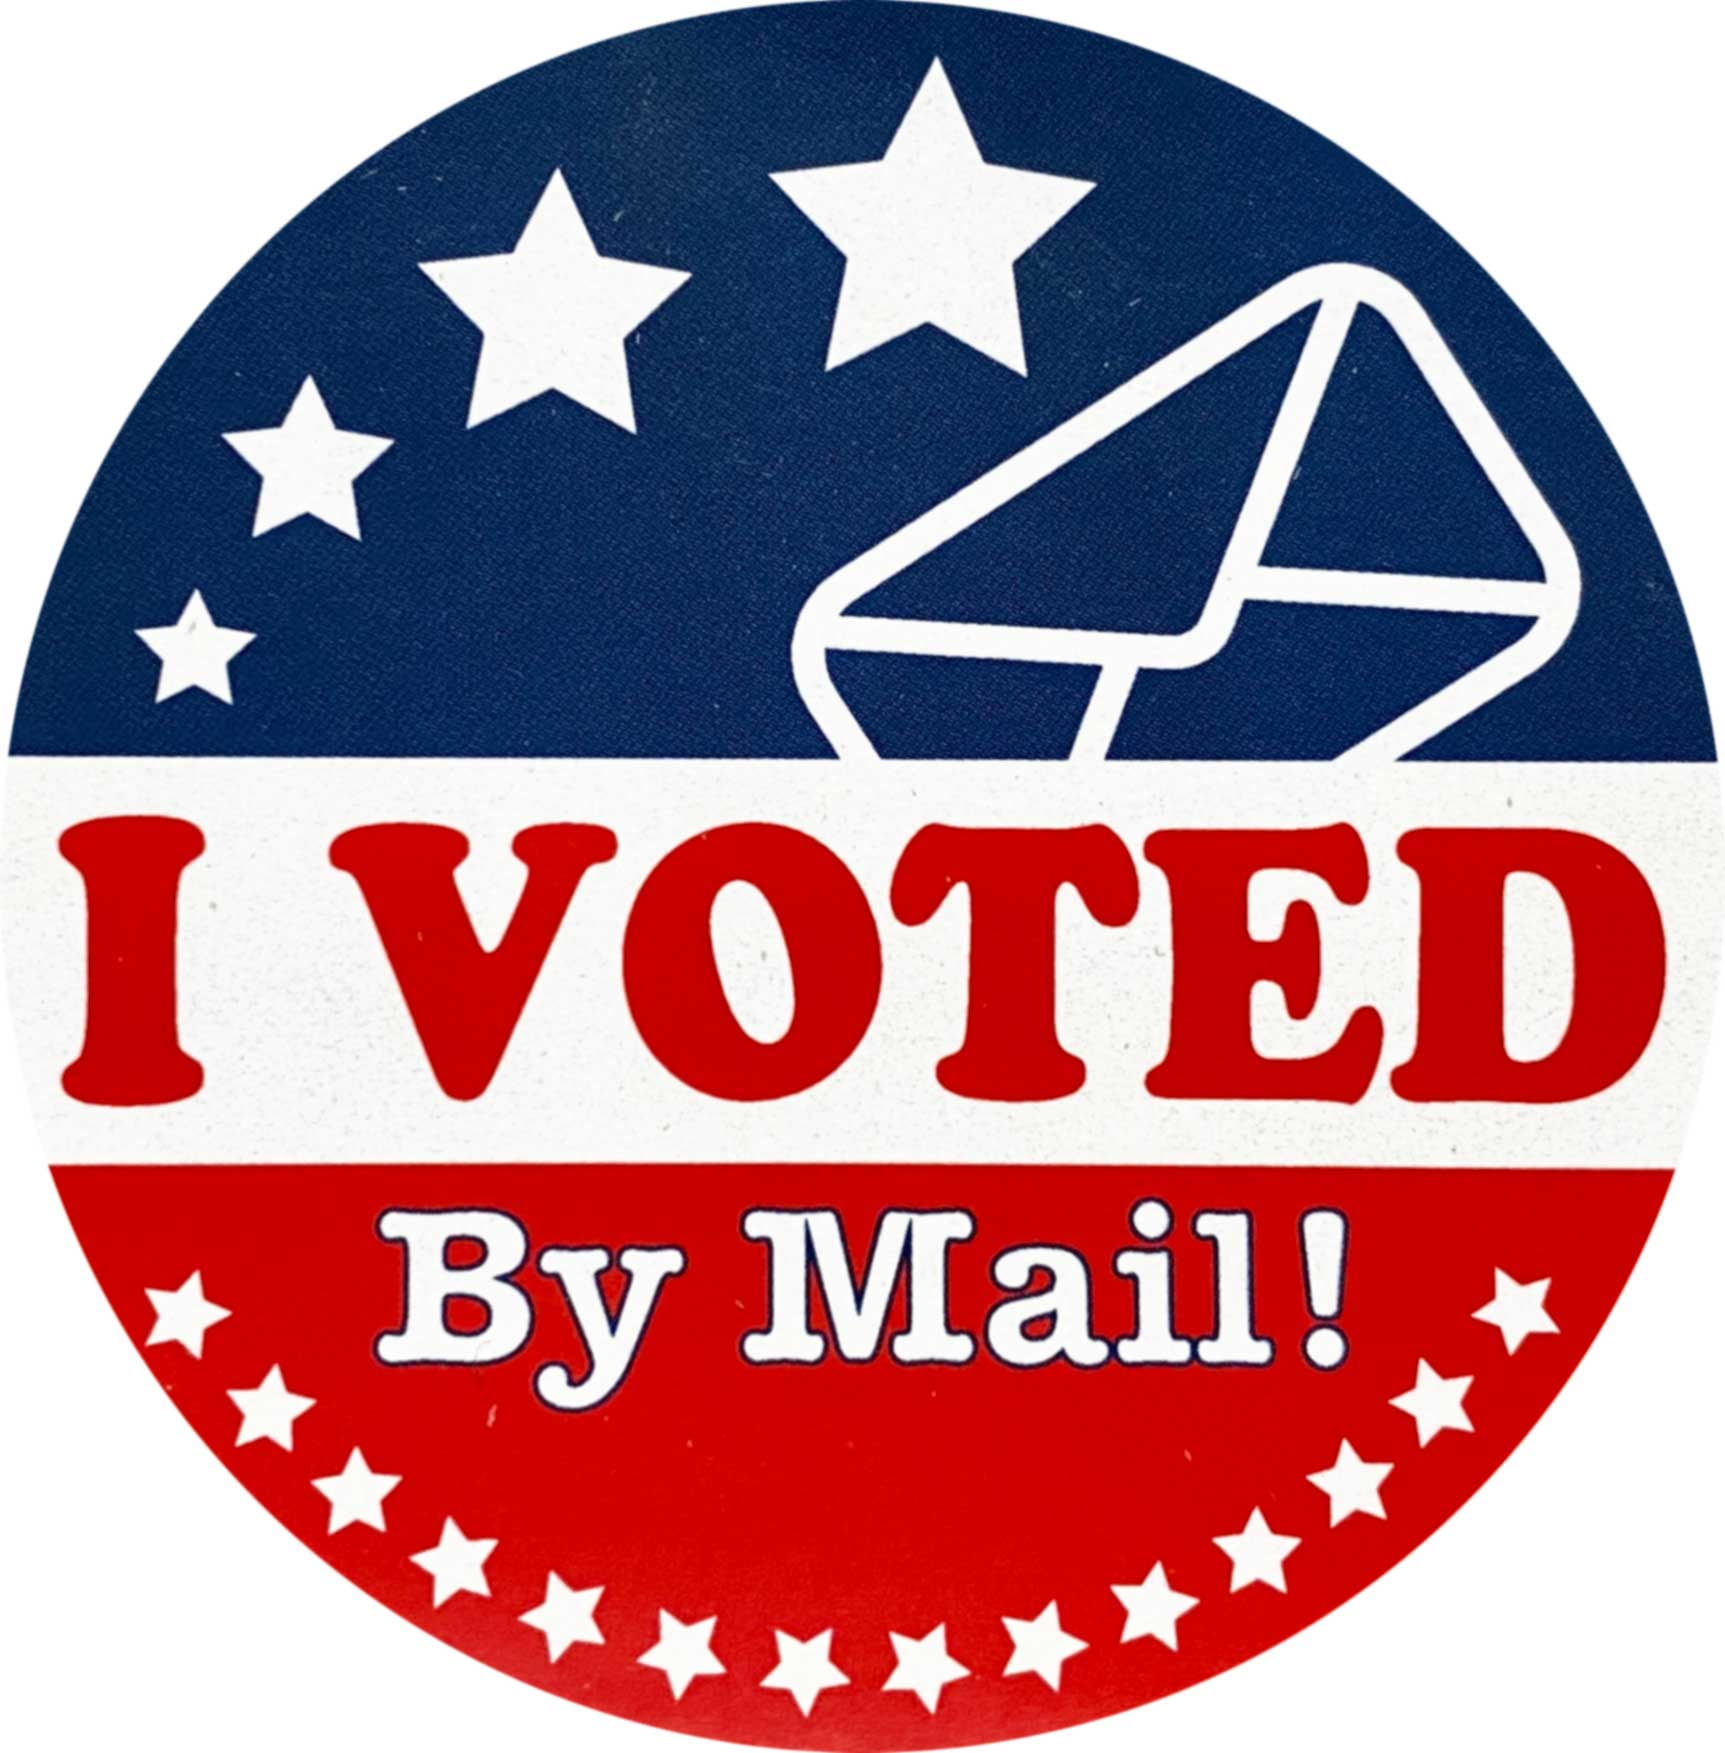 I VOTED By Mail Stickers 2.5" Inch Round 25 Pack